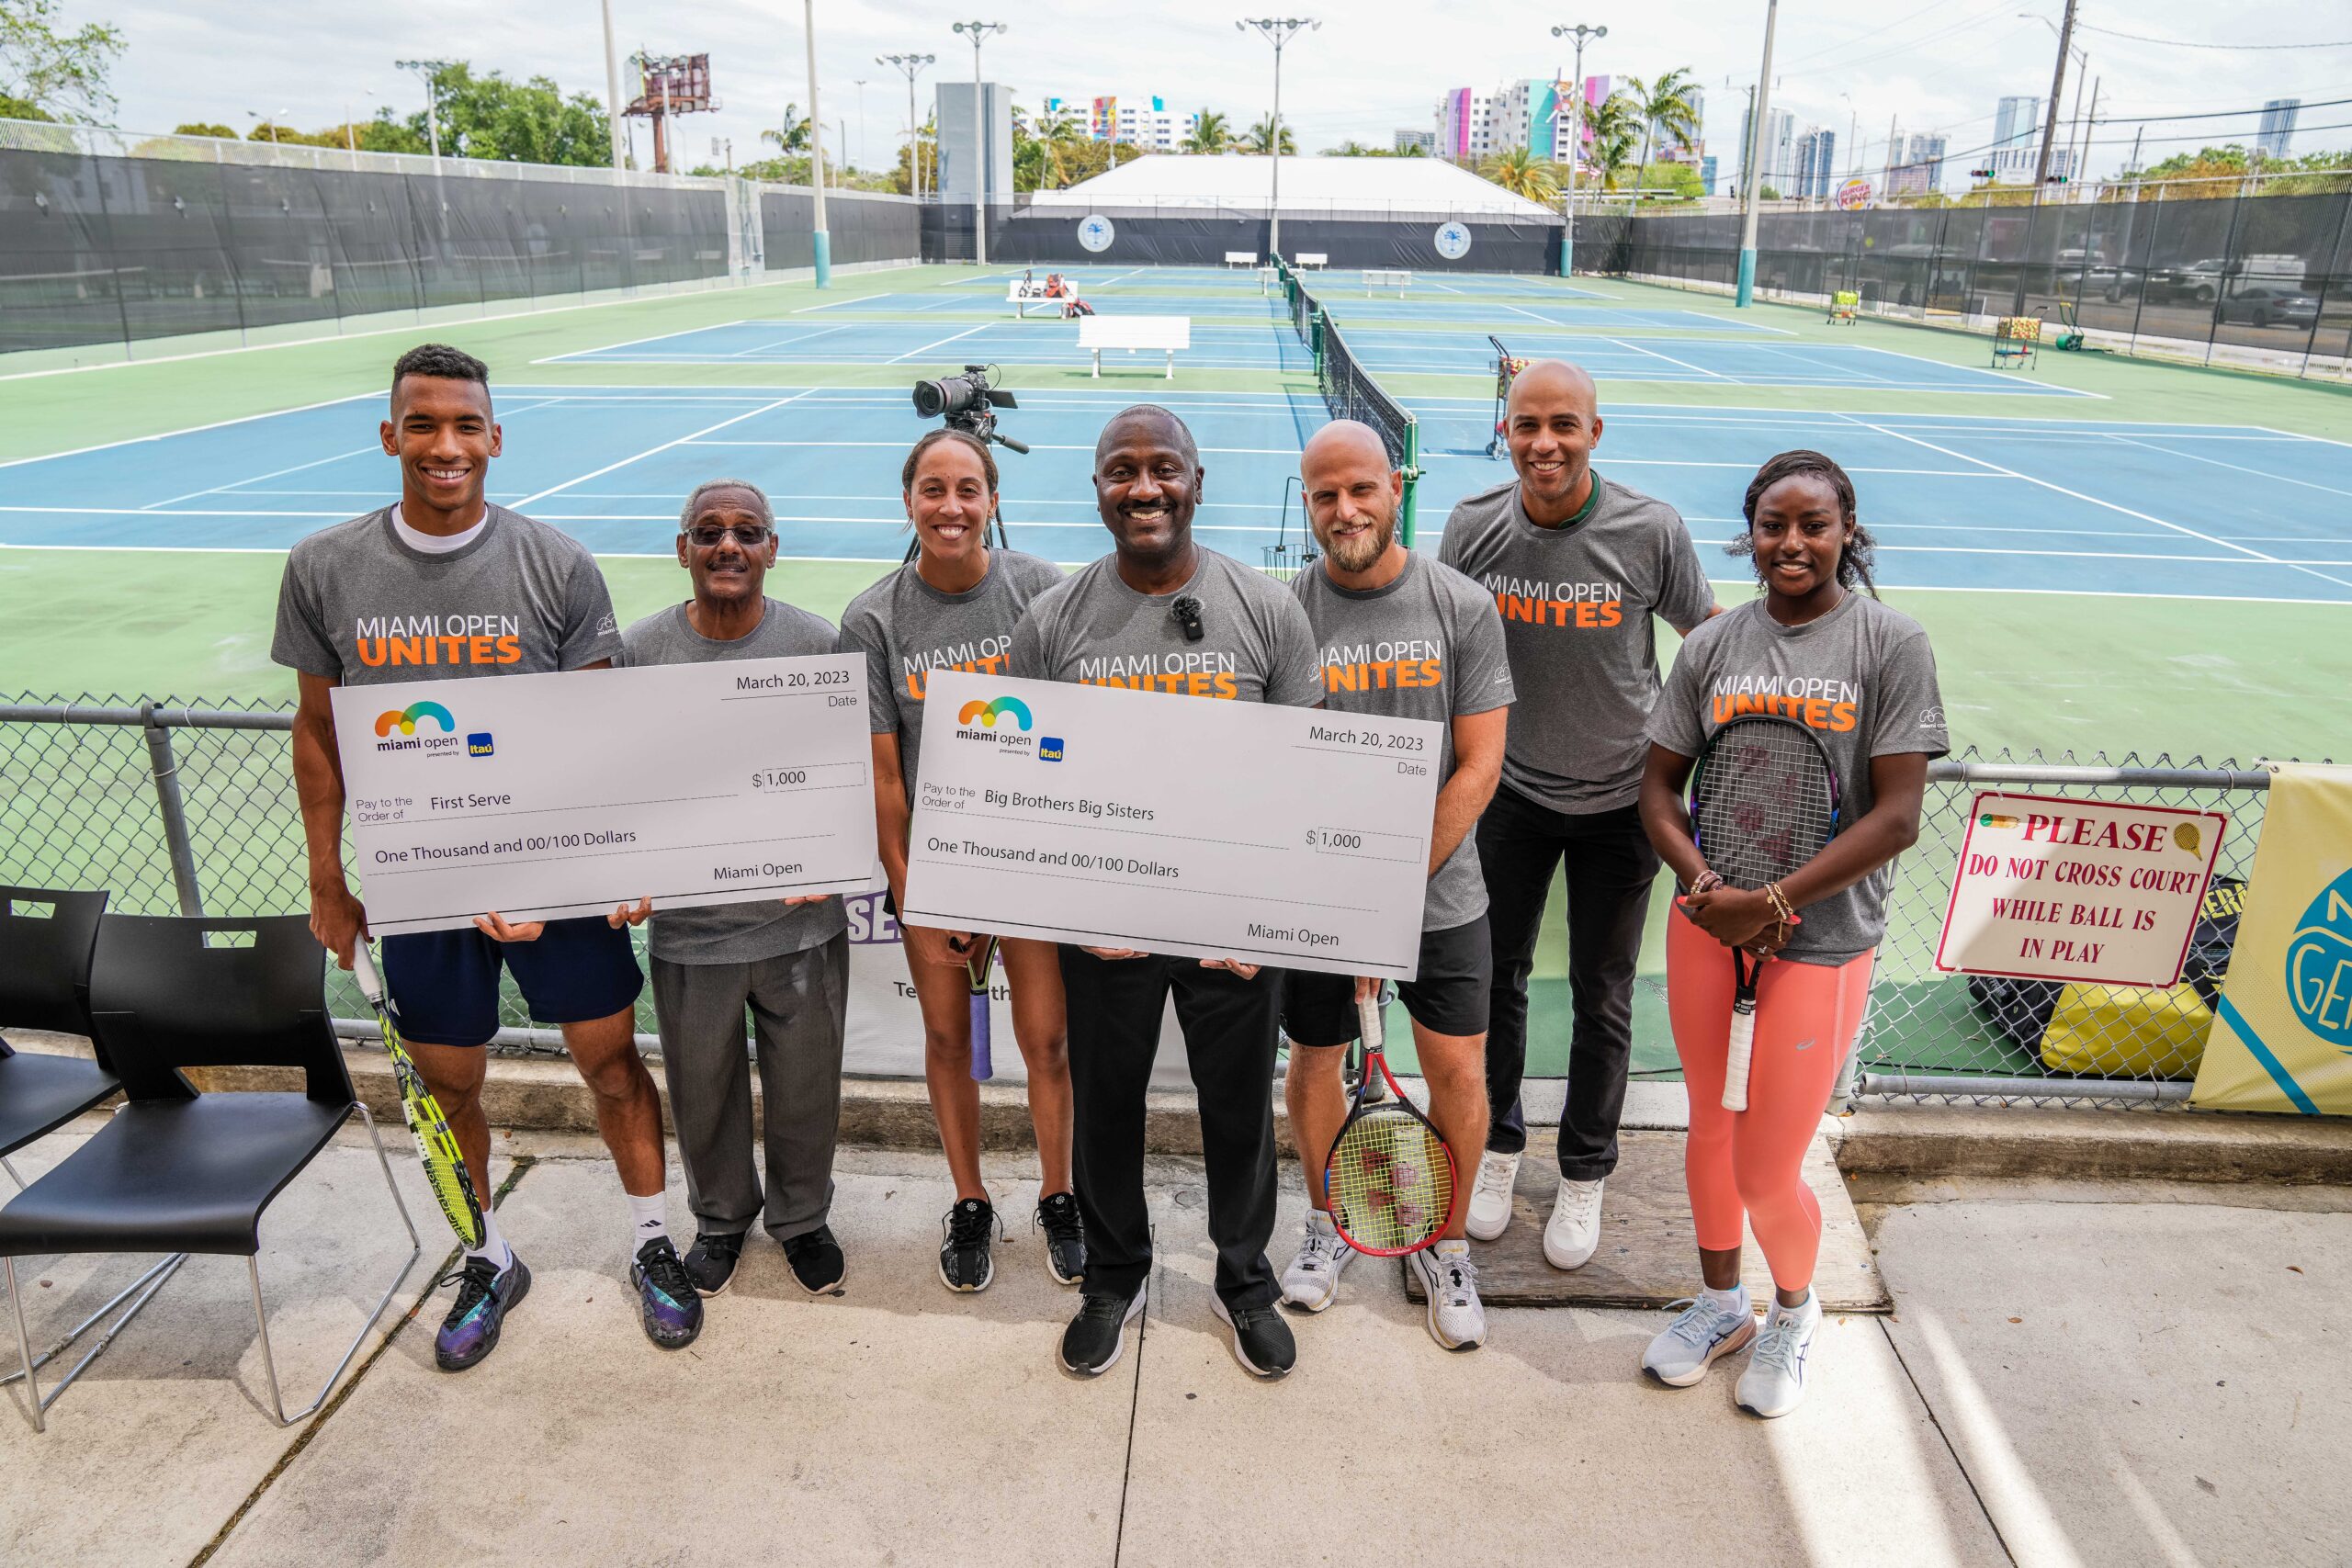 ATP Players Felix Auger Aliassime and Denis Kudla, with WTA Players Madison Keys and Alycia Parks, along with Miami Open Tournament Director, James Blake during the Big Brothers, Big Sisters event at Moore Park, in Miami on March 20, 2023.